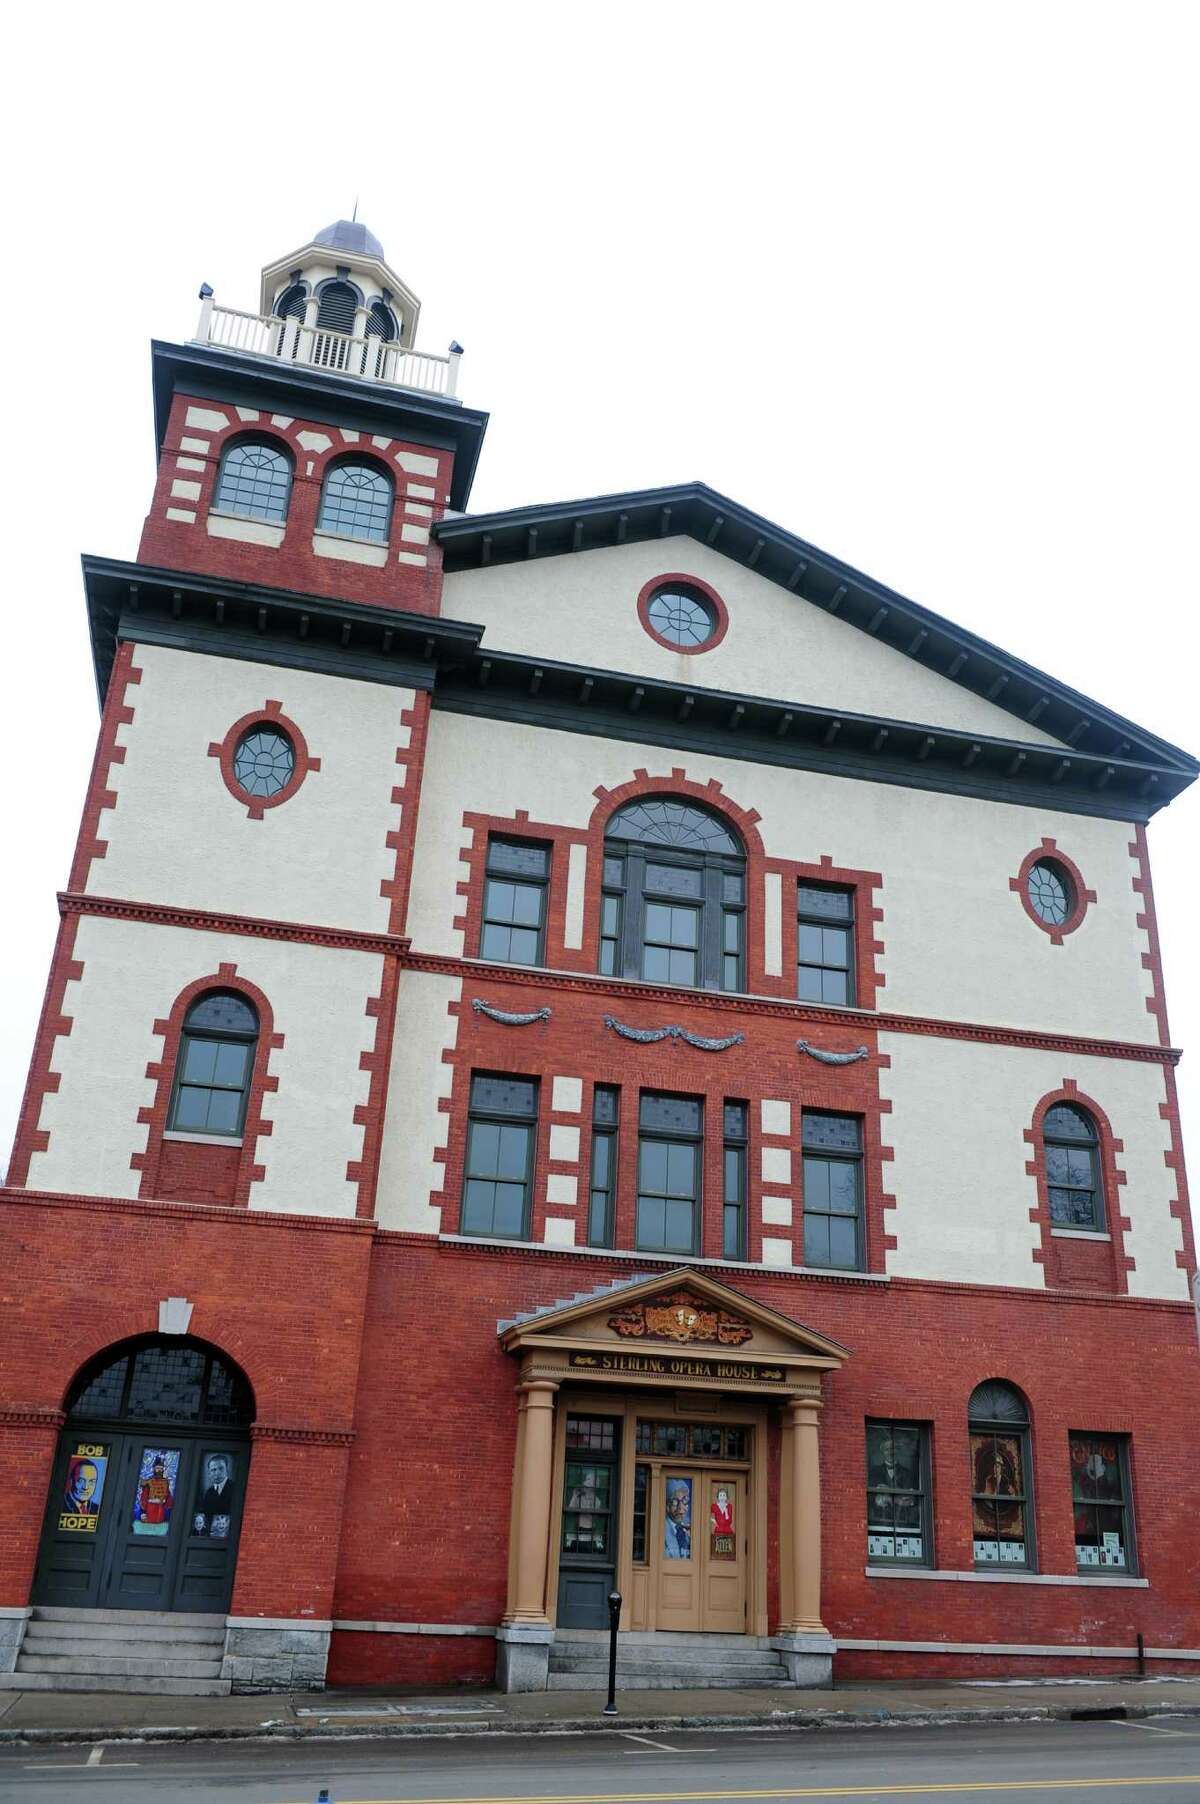 U.S. Rep. Rosa DeLauro recently secured a grant for $150,000 that will go toward interior renovations at the Sterling Opera House in Derby, Conn.